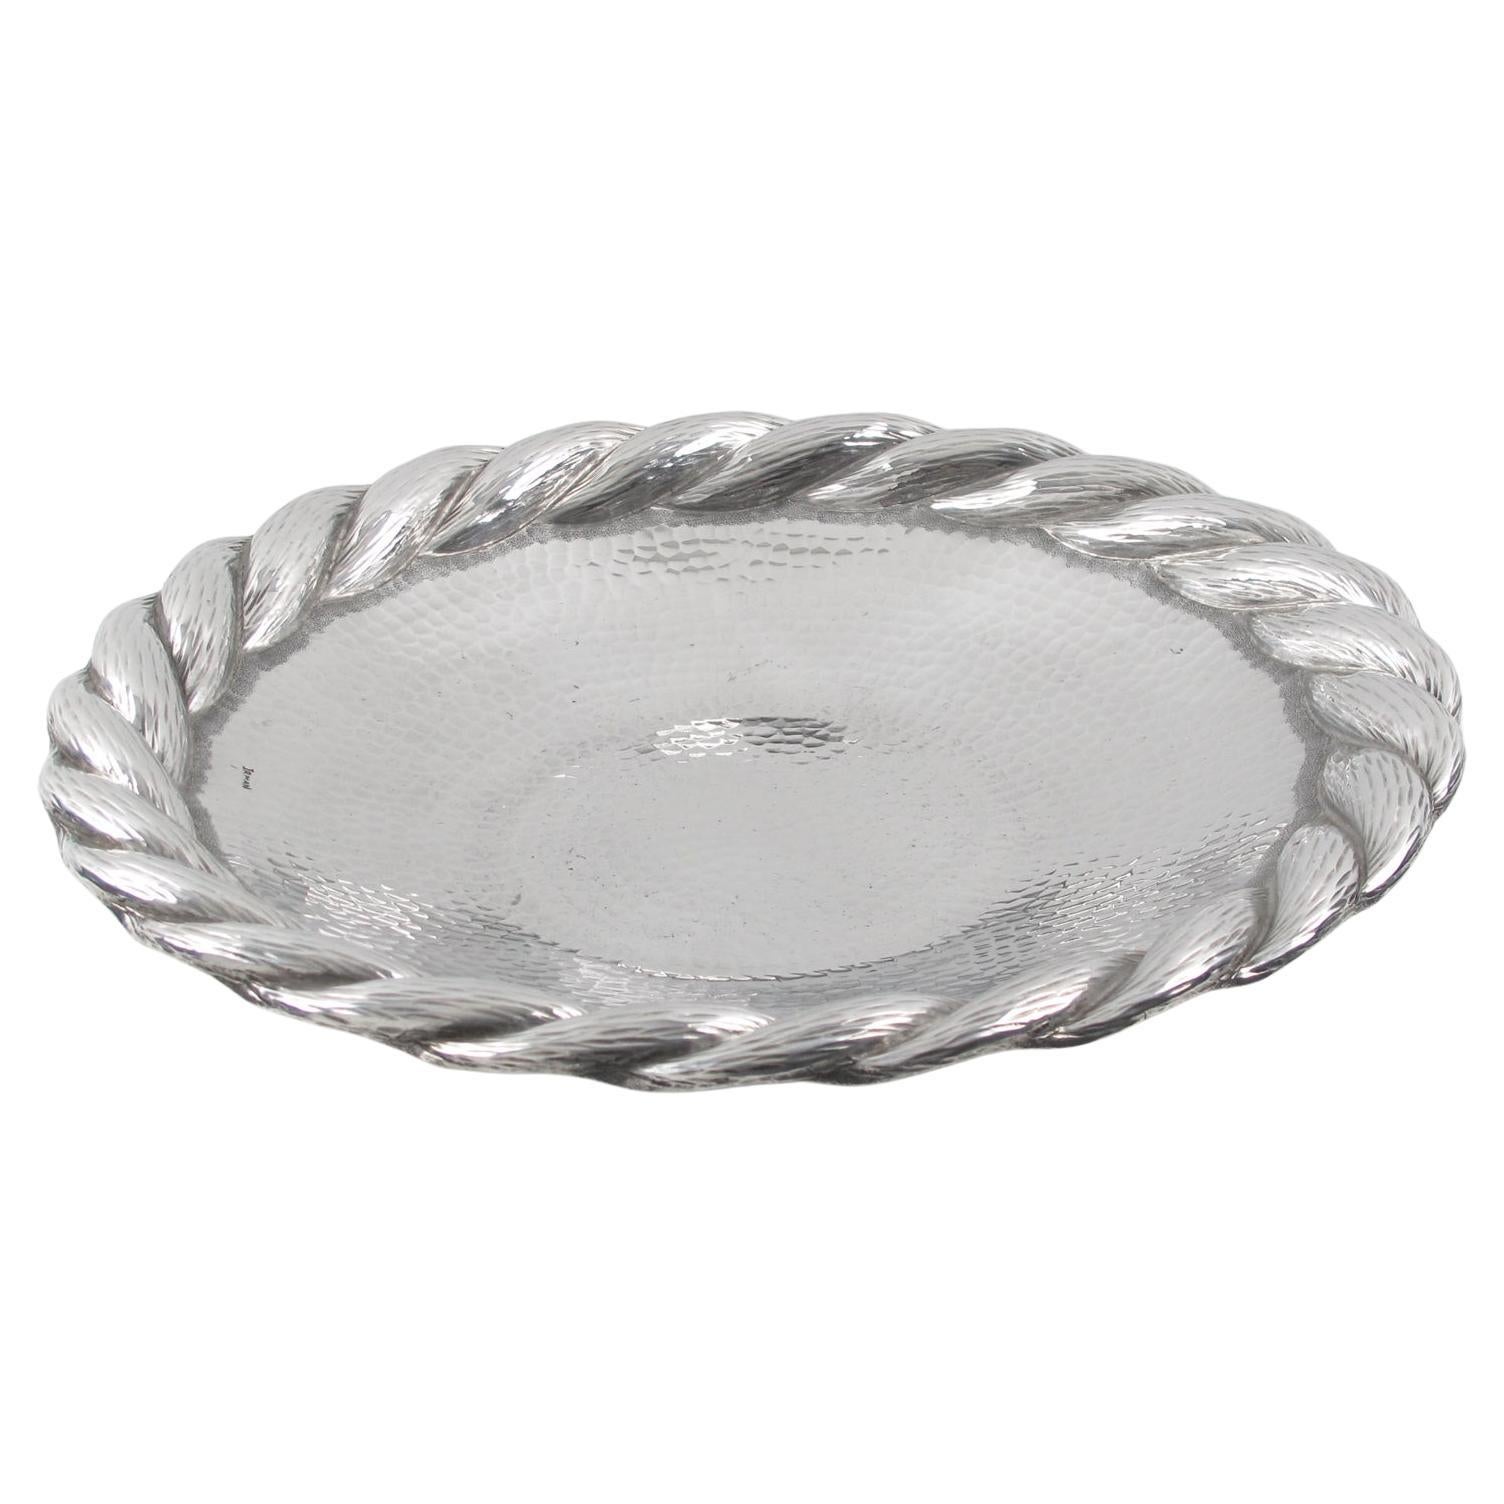 Art Deco Aluminum Platter Centerpiece or Tray by Irman France, 1930s For Sale